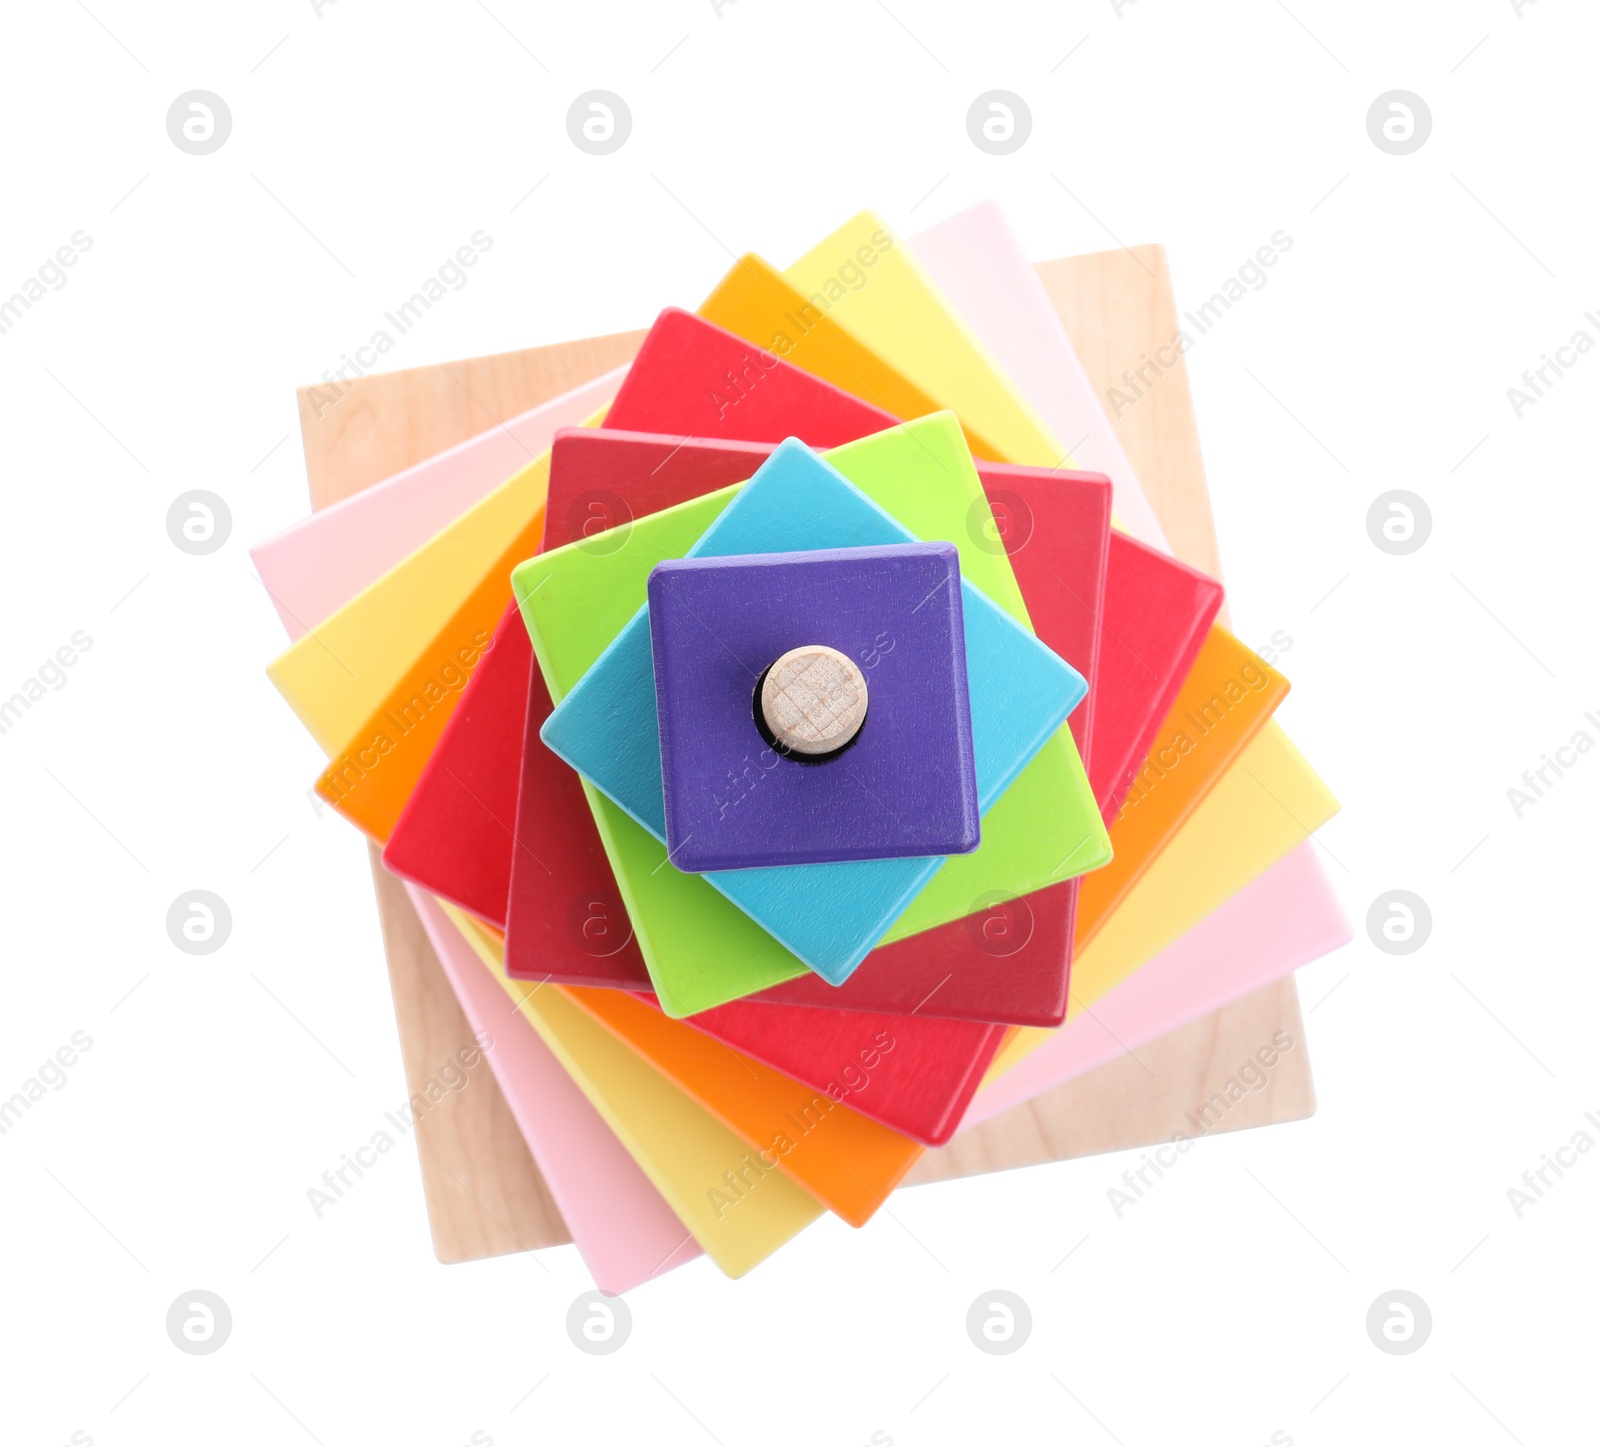 Photo of Colorful wooden pyramid isolated on white, top view. Child's toy